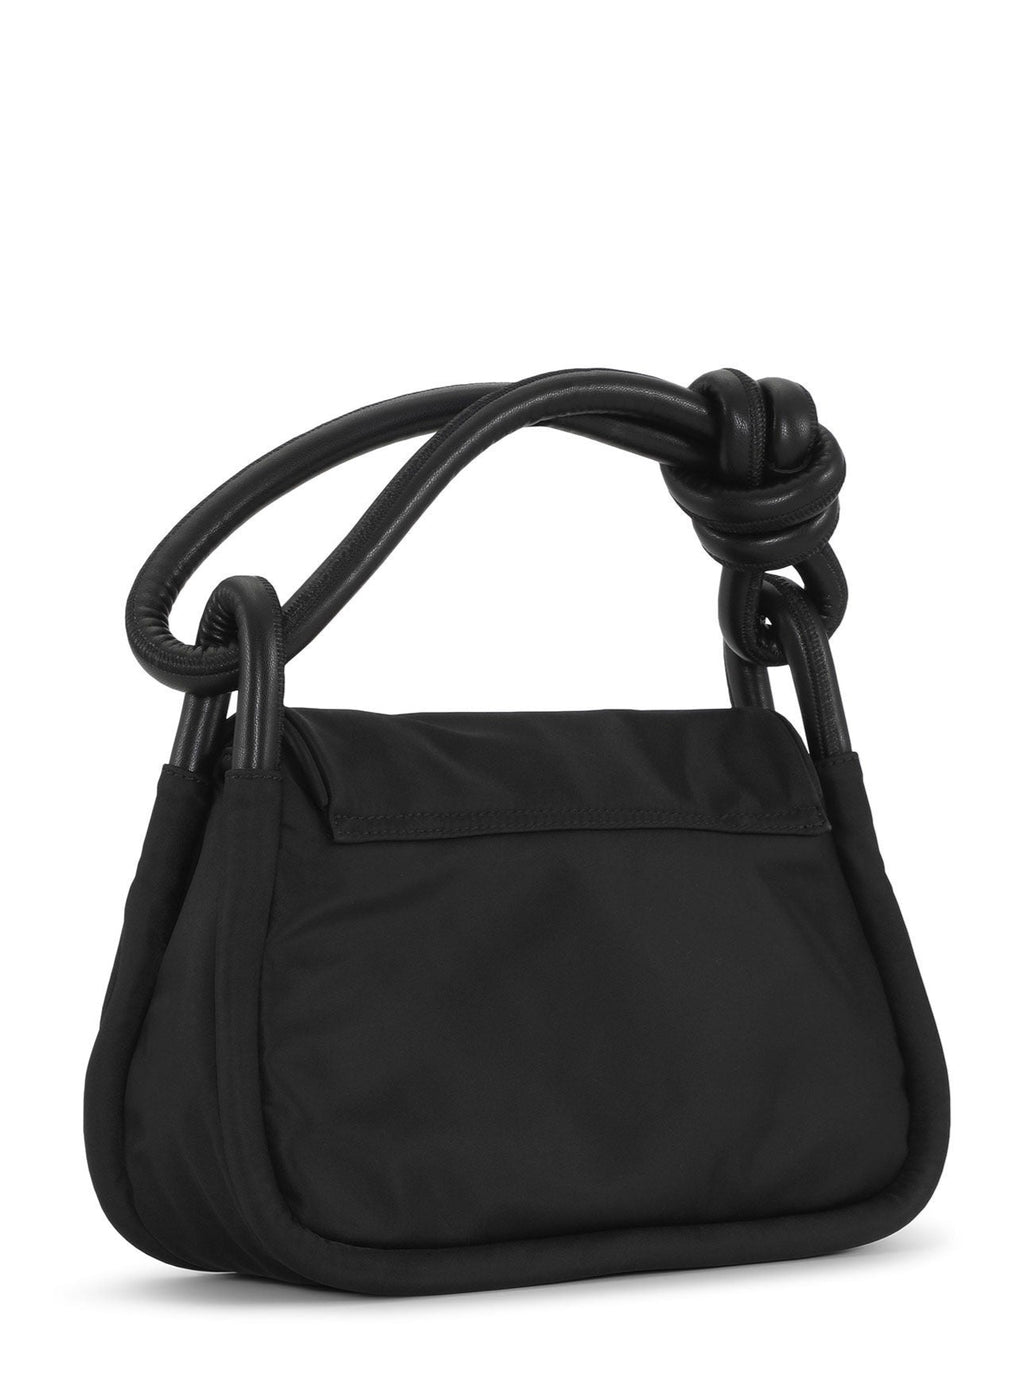 Knot Flap Over Bag in Black